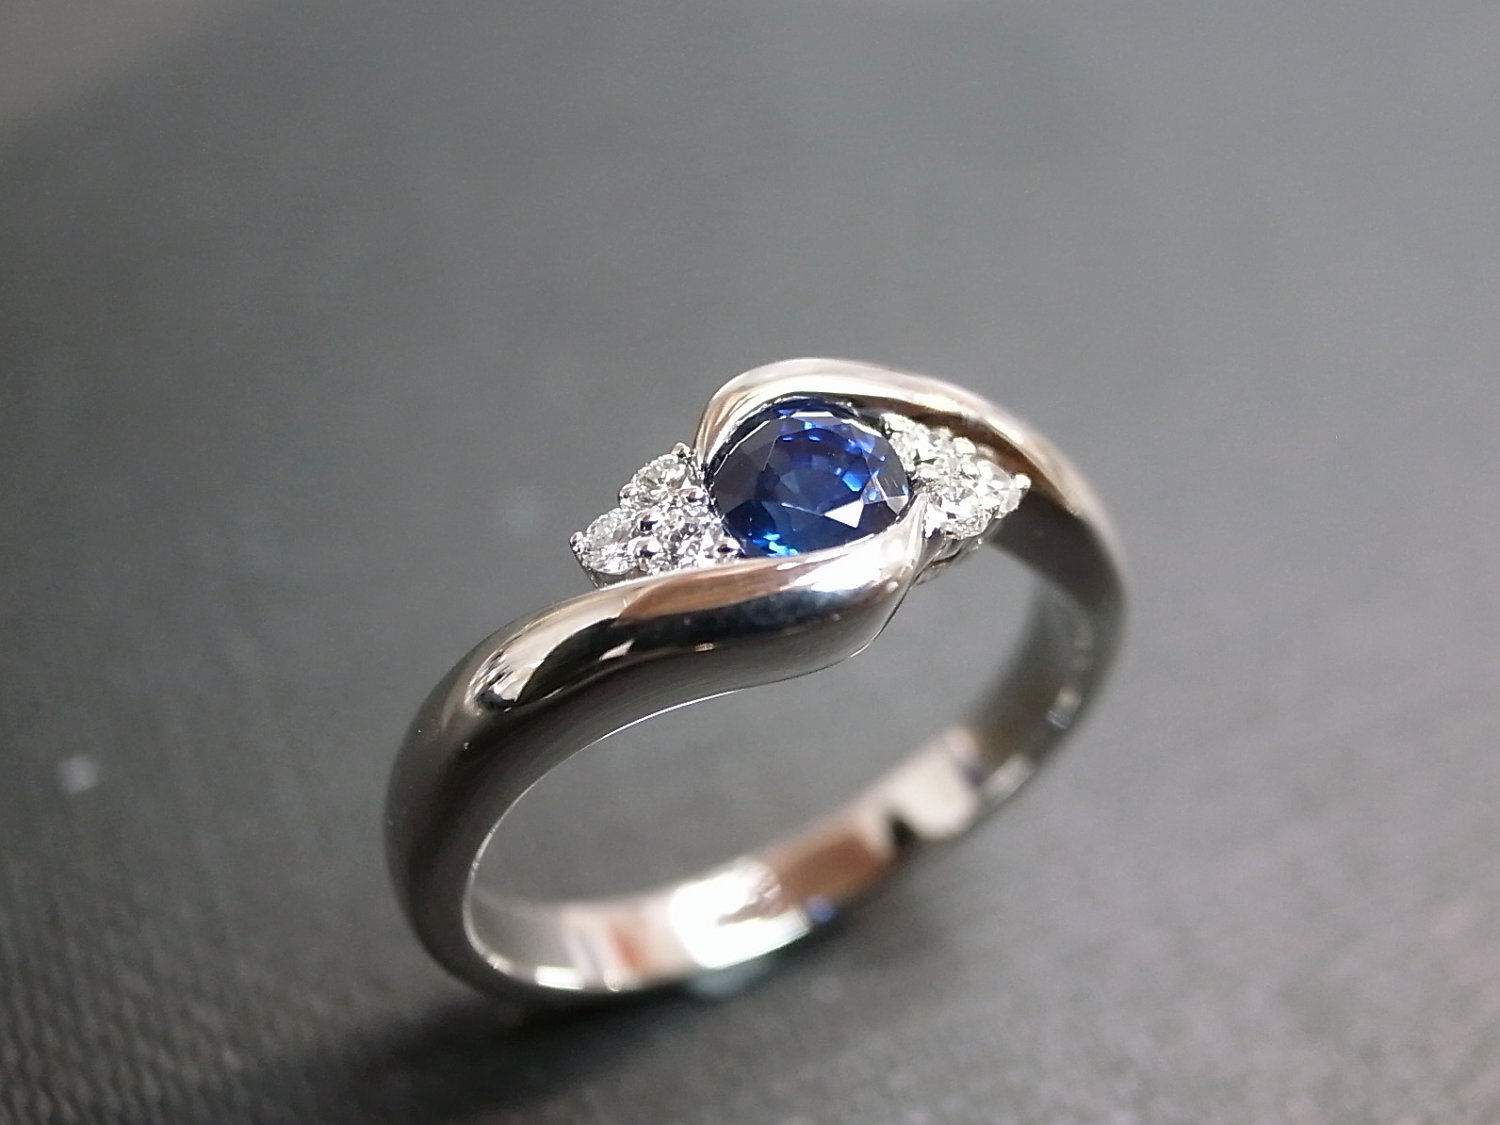 Diamonds Wedding Ring With Blue Sapphire In 14K White Gold